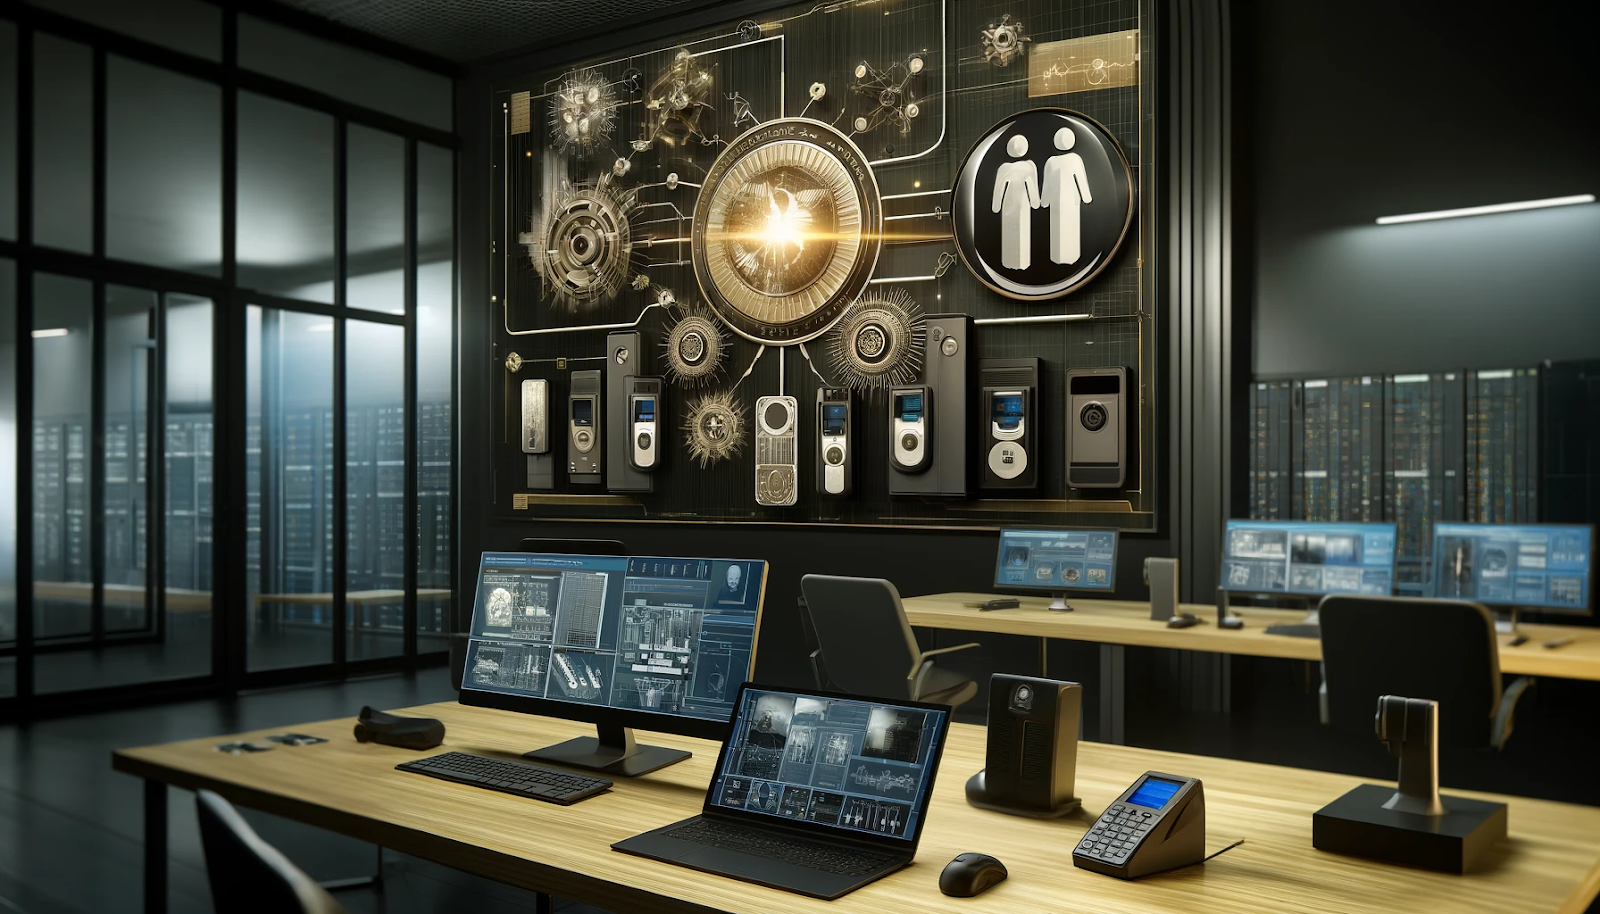 A photorealistic image showing the integration of smart security systems, including surveillance cameras, biometric access controls, and a central software interface, set against a sleek black and gold background to symbolize advanced technology and security.